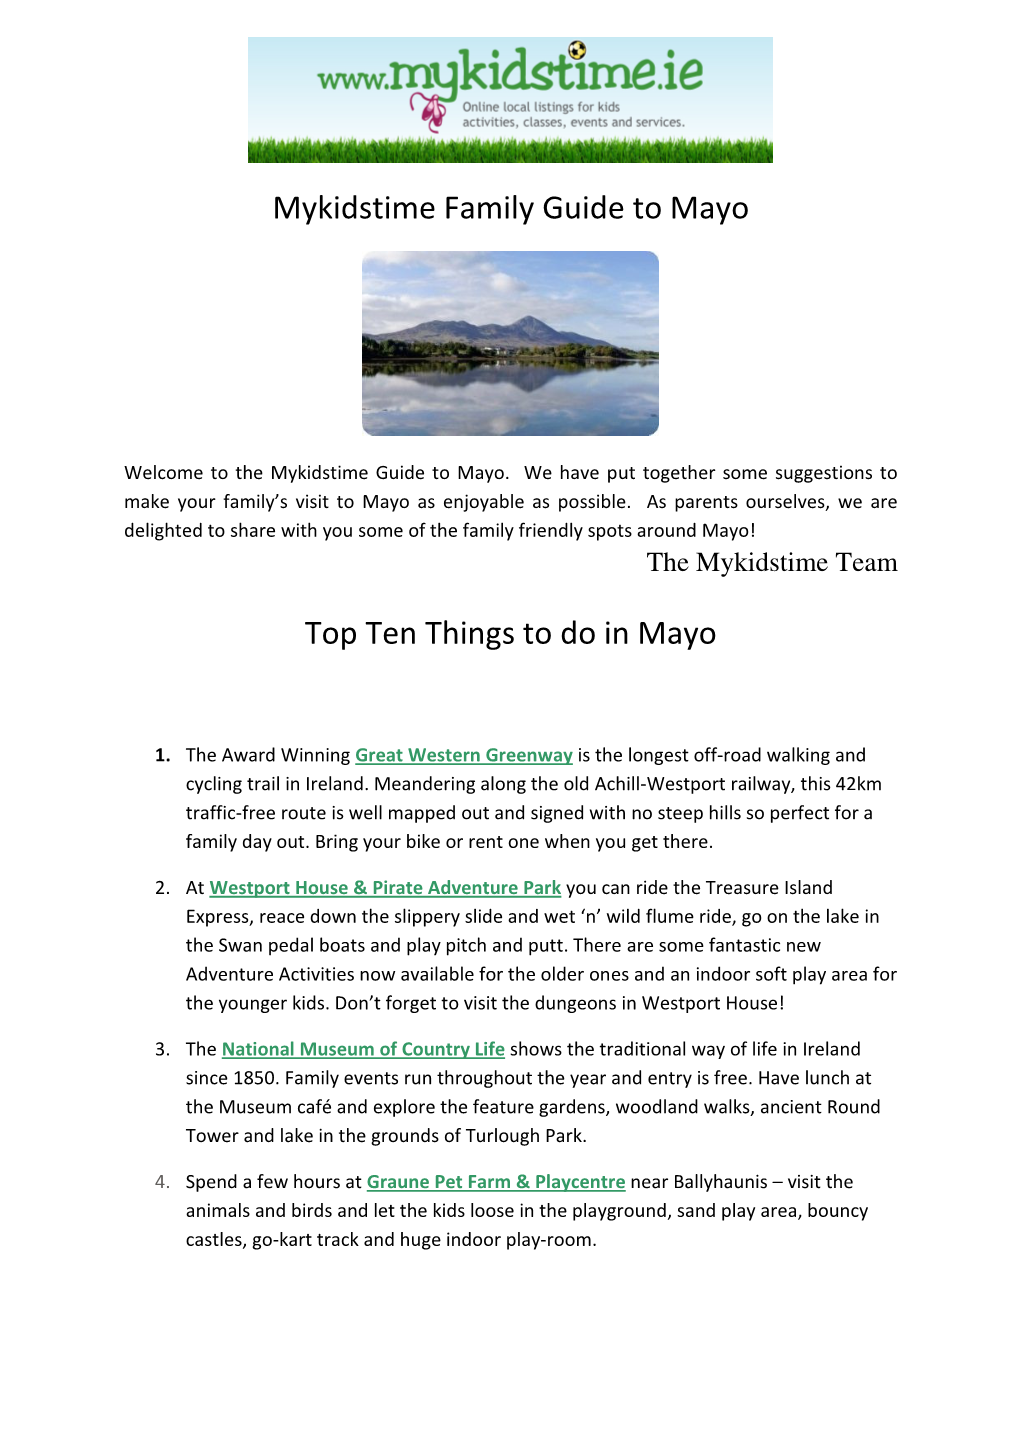 Mykidstime Family Guide to Mayo Top Ten Things to Do in Mayo